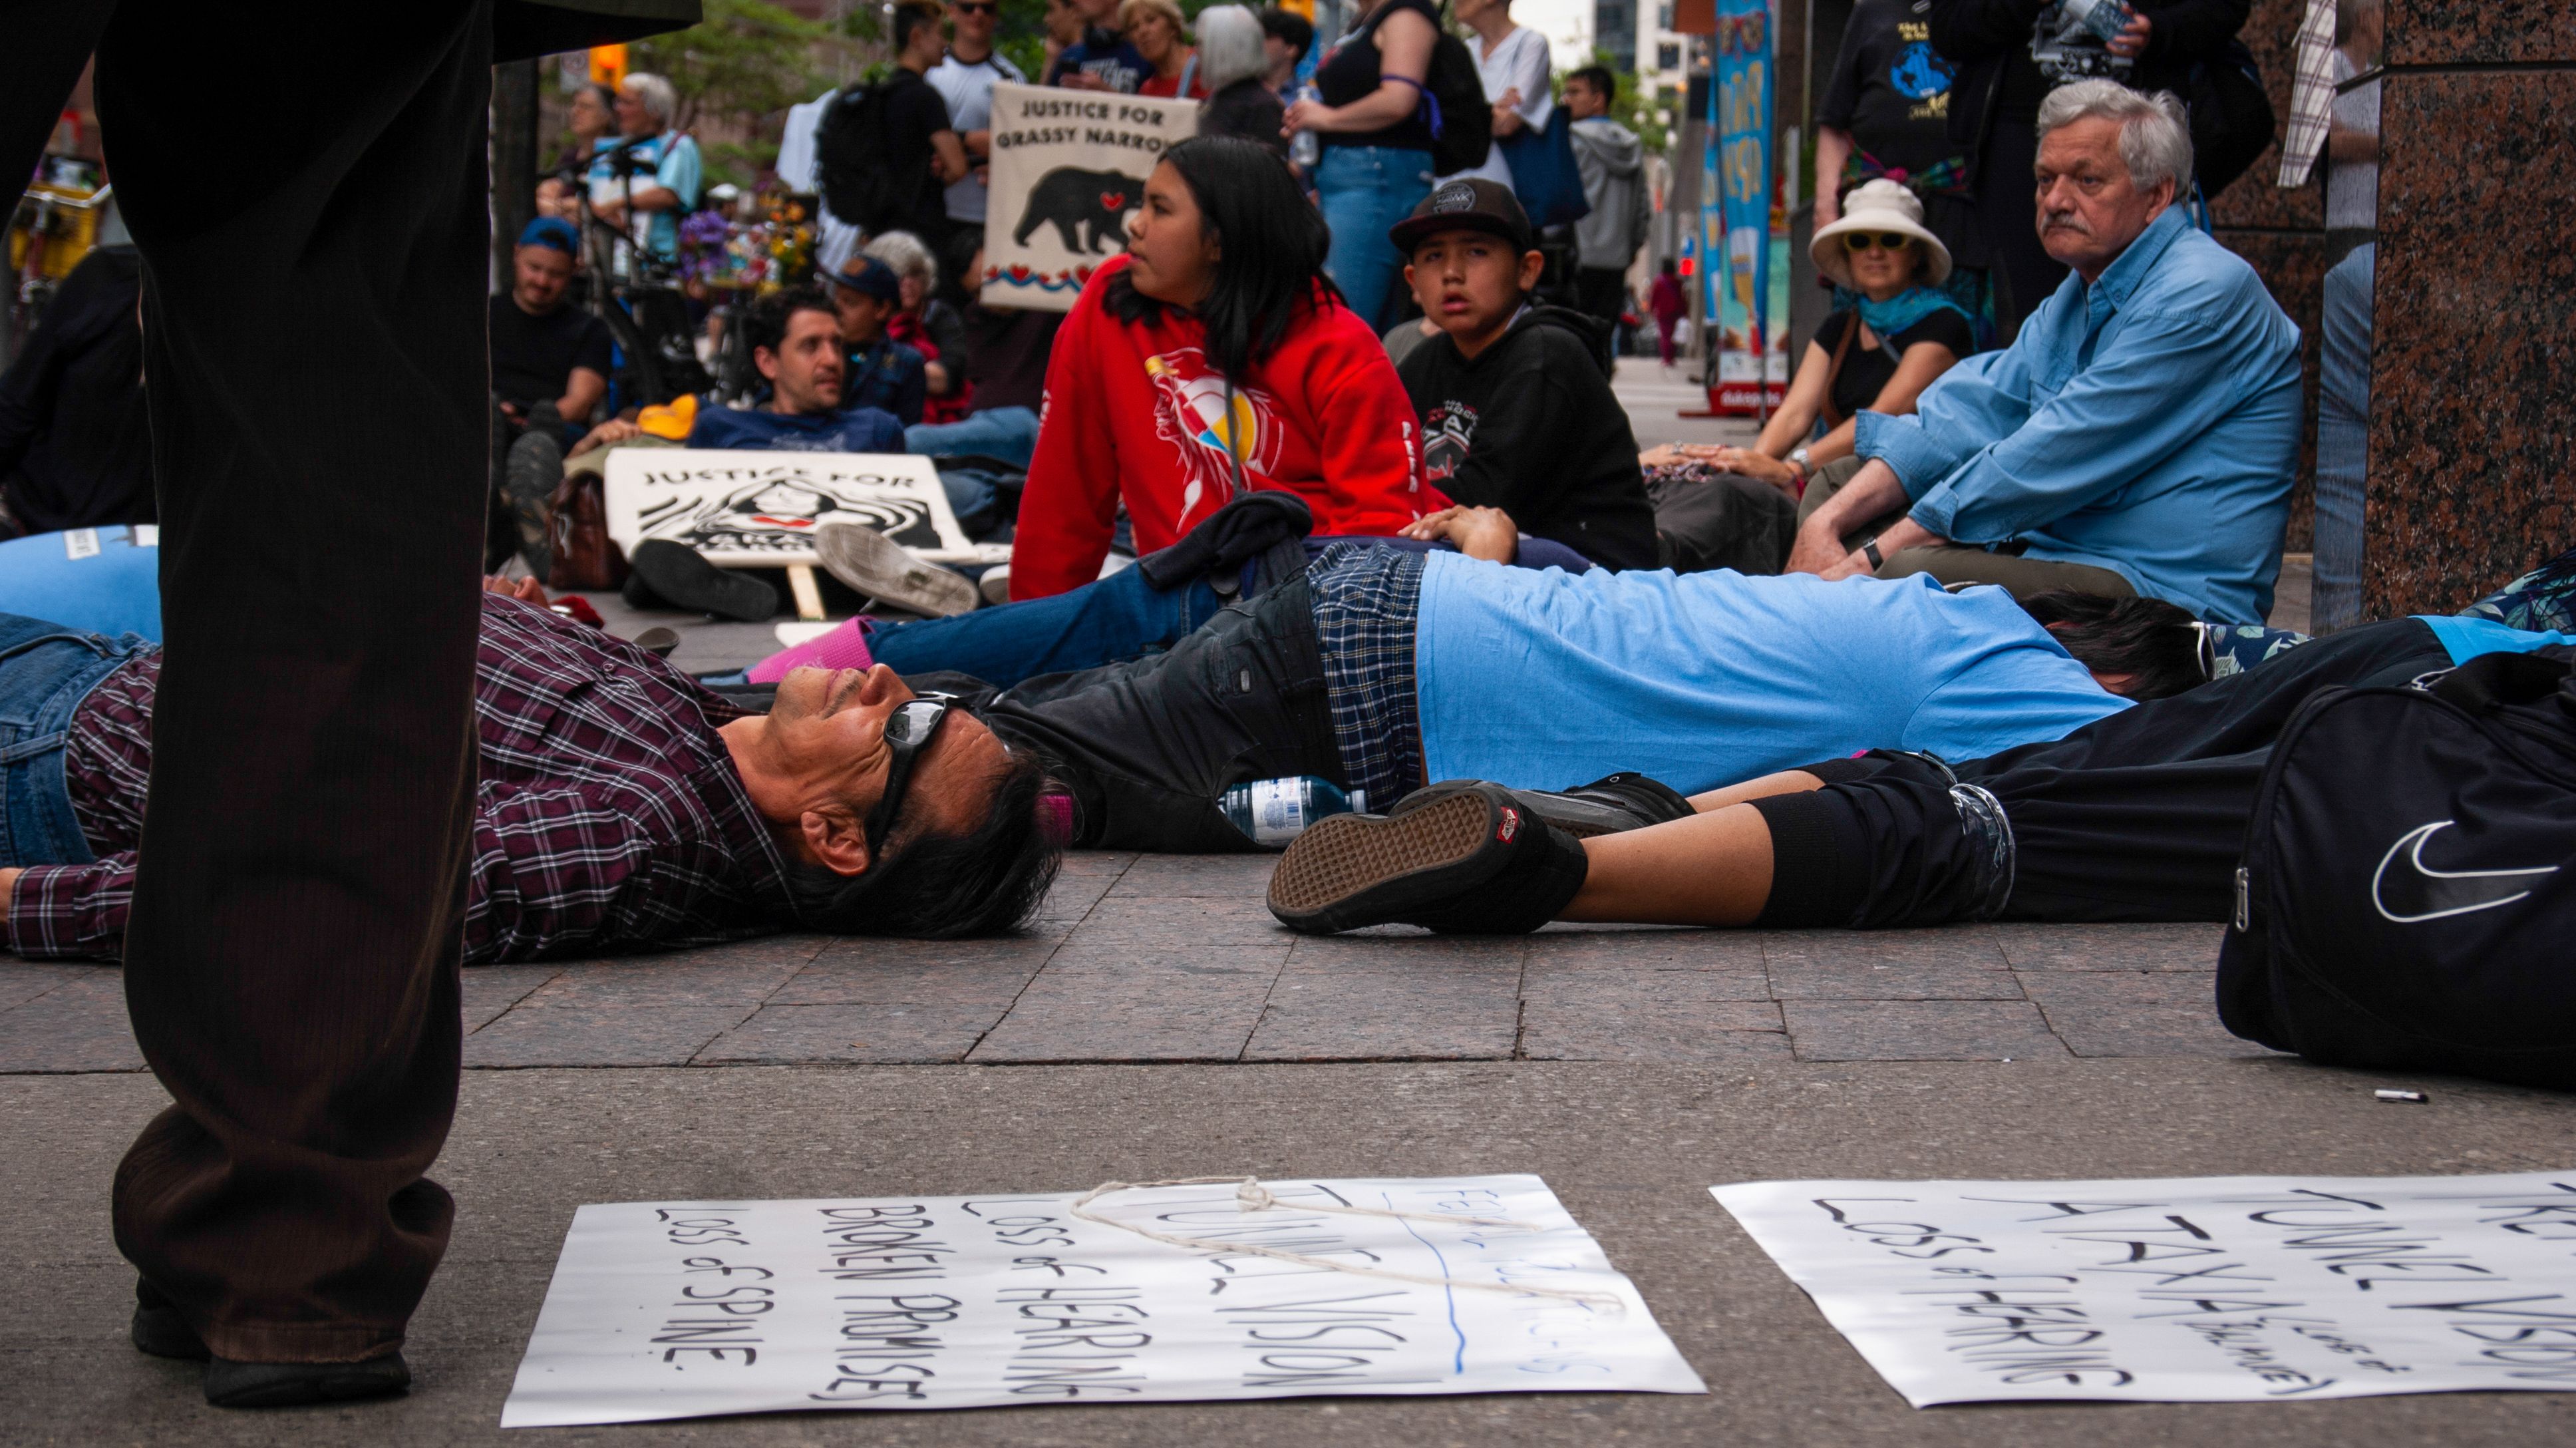 Residents of Grassy Narrows and their supporters lie on the ground in front of the Indigenous Services Canada Office in Toronto. The community organized a "die-in" in front of the office to remind the Canadian government of their suffering. Image by Shelby Gilson. Canada, 2019.